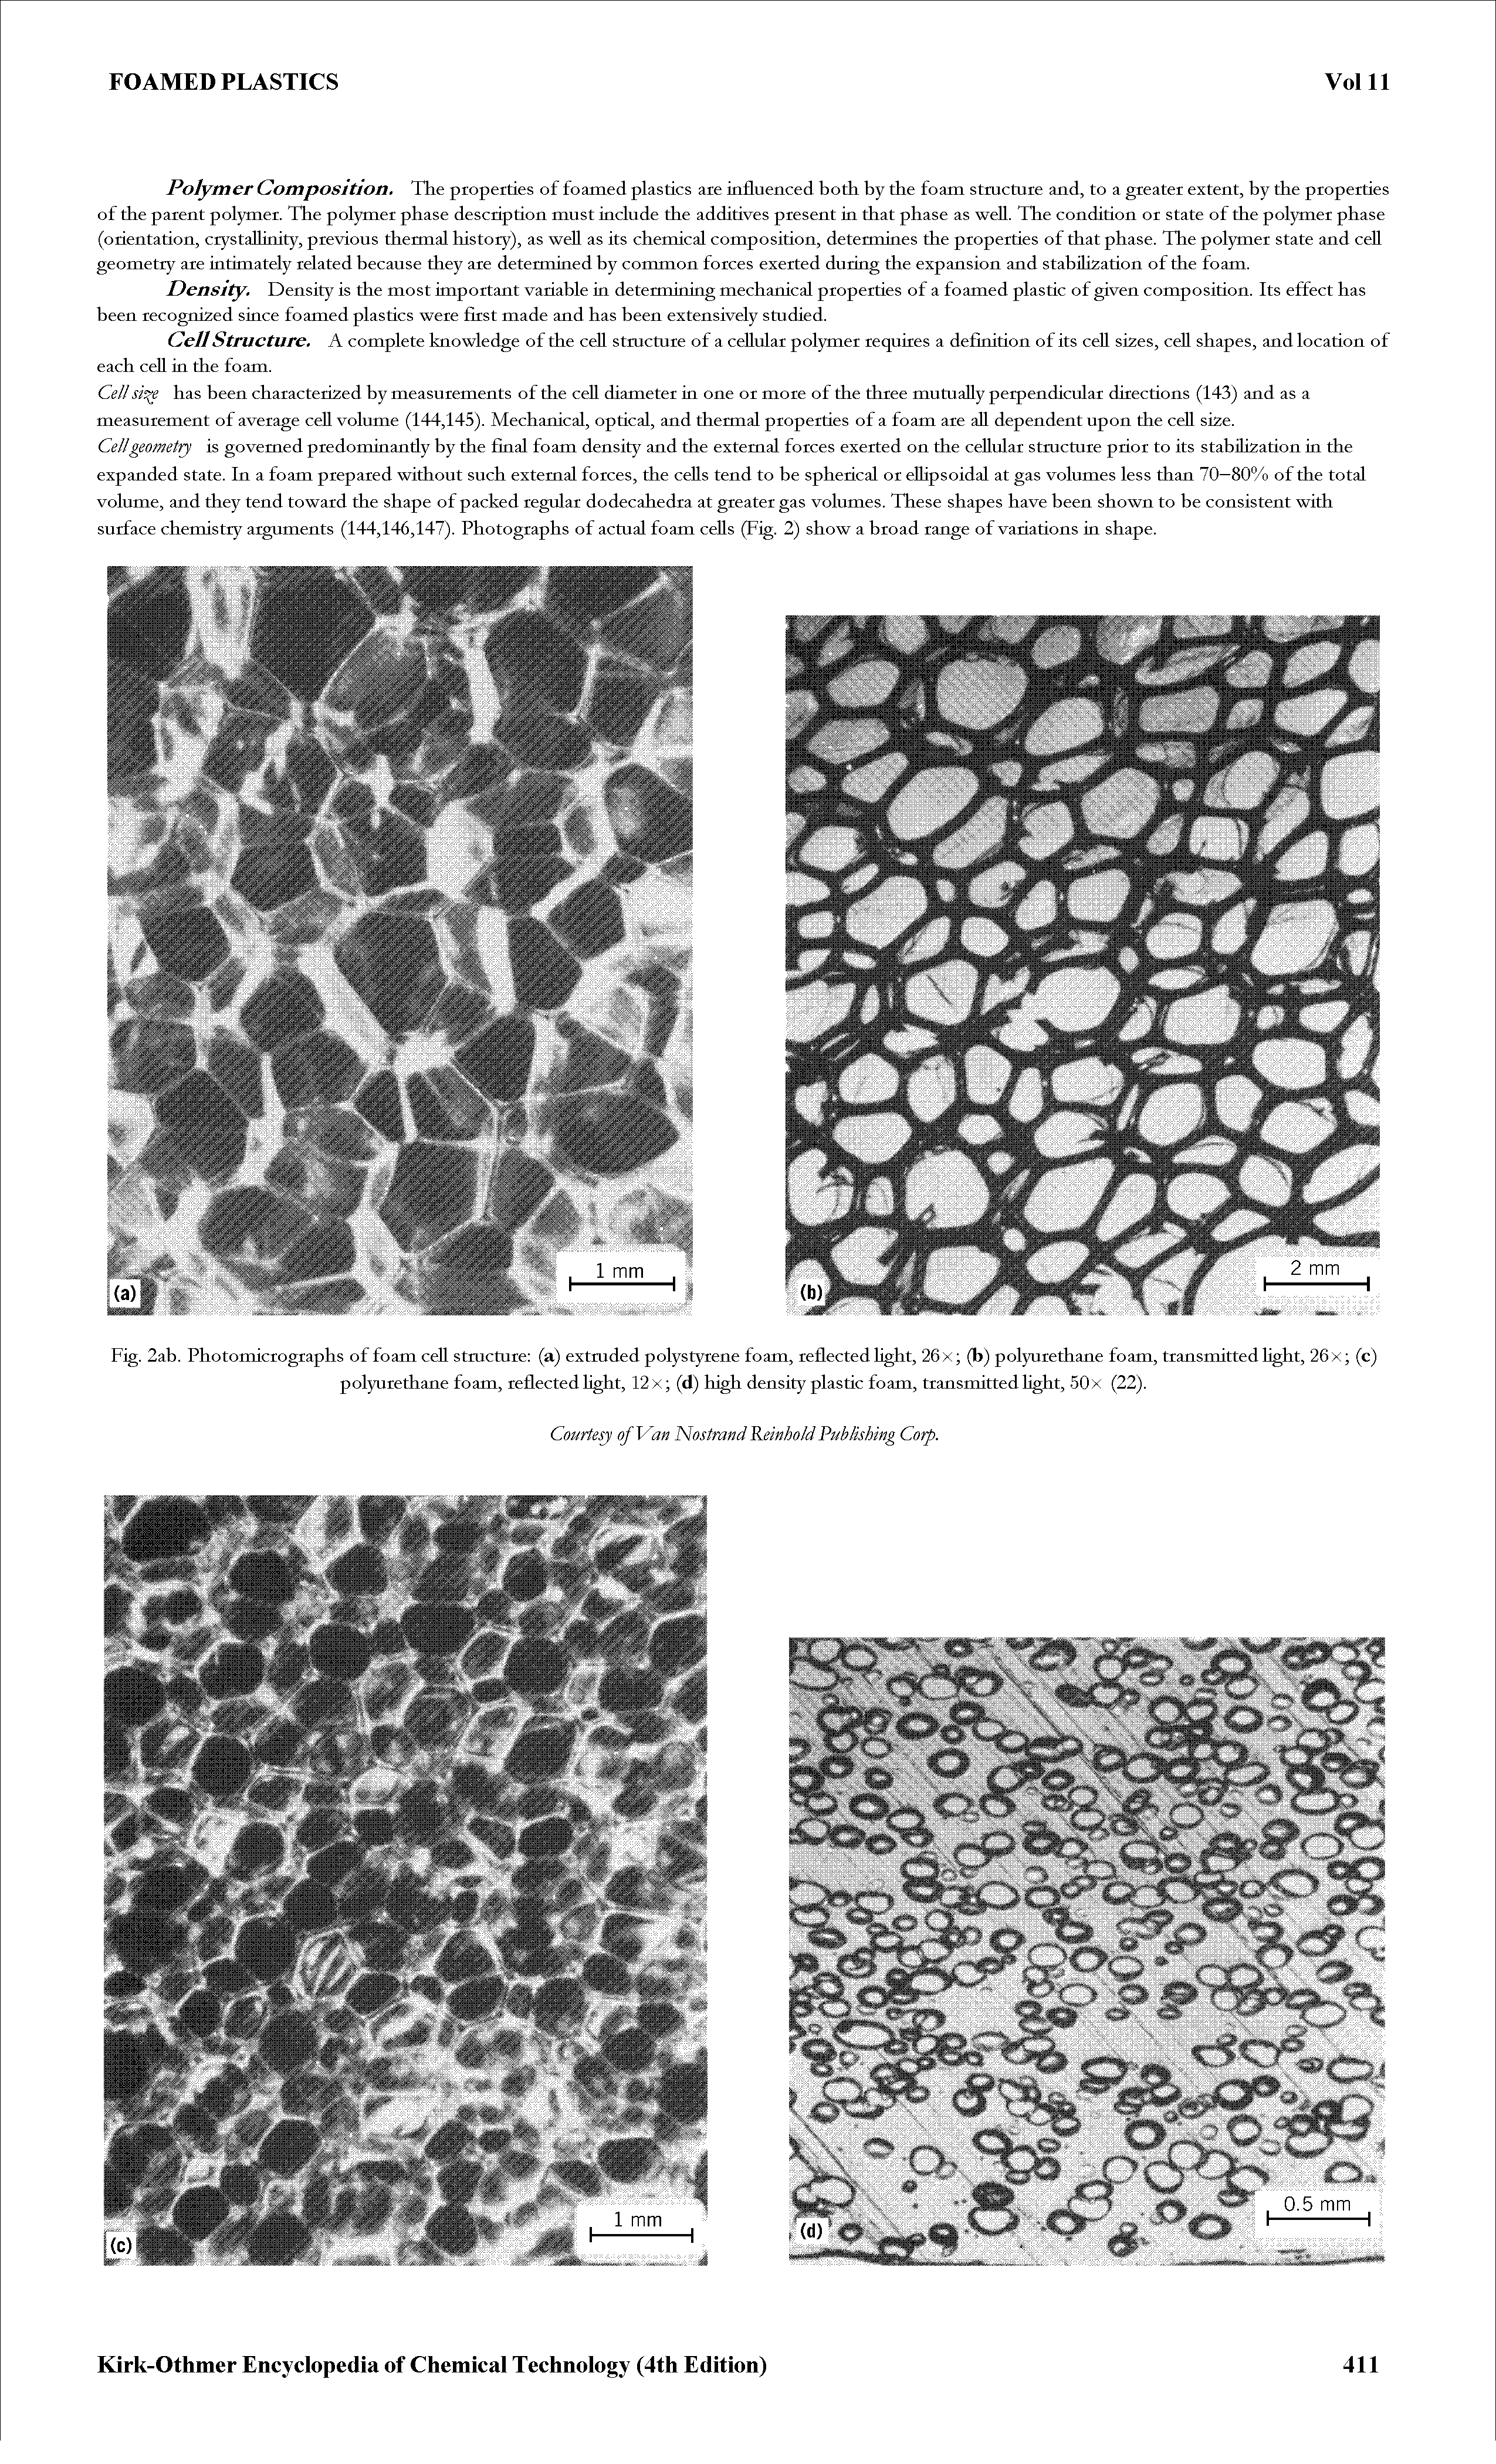 Fig. 2ab. Photomicrographs of foam cell stmcture (a) extmded polystyrene foam, reflected light, 26 x (b) polyurethane foam, transmitted light, 26 x (c) polyurethane foam, reflected light, 12 x (d) high density plastic foam, transmitted light, 50x (22).